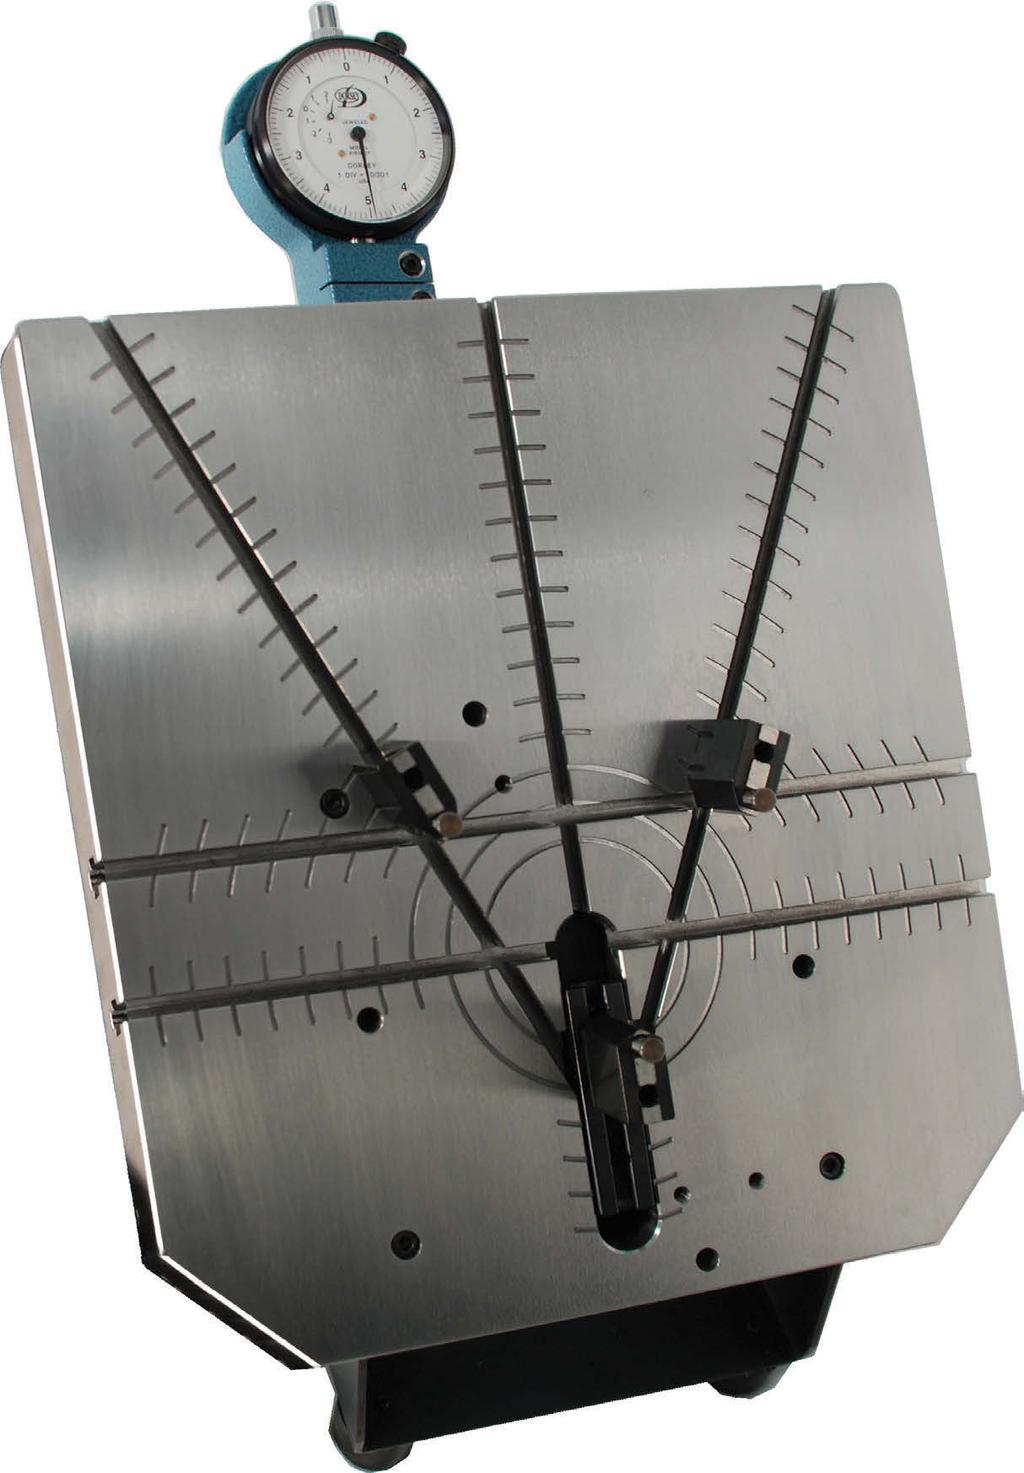 BC Universal ID/OD Bench Comparator Adjustable Inside / Outside Diameter Fixtures This comparator offers 2 or 3 point measurements for both ID and OD on one benchtop plate.